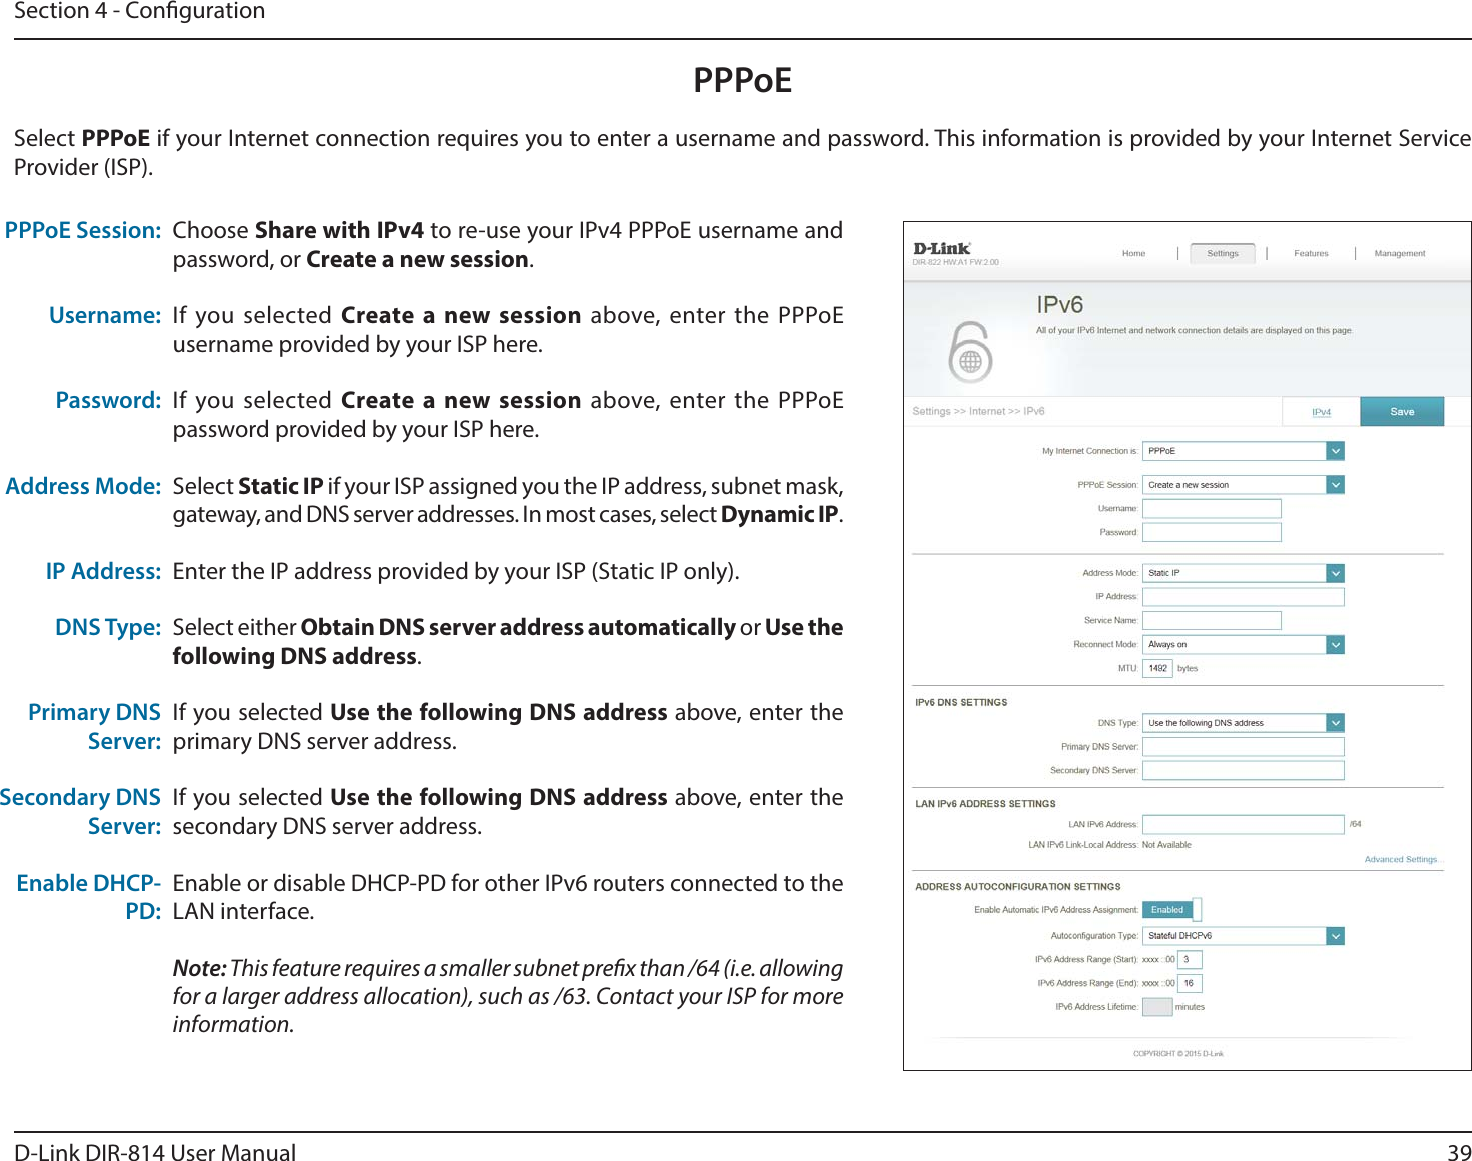 39D-Link DIR-814 User ManualSection 4 - CongurationPPPoEChoose Share with IPv4 to re-use your IPv4 PPPoE username and password, or Create a new session.If you selected Create a new session above, enter the PPPoE username provided by your ISP here.If you selected Create a new session above, enter the PPPoE password provided by your ISP here.Select Static IP if your ISP assigned you the IP address, subnet mask, gateway, and DNS server addresses. In most cases, select Dynamic IP.Enter the IP address provided by your ISP (Static IP only).Select either Obtain DNS server address automatically or Use the following DNS address.If you selected Use the following DNS address above, enter the primary DNS server address. If you selected Use the following DNS address above, enter the secondary DNS server address.Enable or disable DHCP-PD for other IPv6 routers connected to the LAN interface.Note: This feature requires a smaller subnet prex than /64 (i.e. allowing for a larger address allocation), such as /63. Contact your ISP for more information.PPPoE Session:Username:Password:Address Mode:IP Address:DNS Type:Primary DNS Server:Secondary DNS Server:Enable DHCP-PD:Select PPPoE if your Internet connection requires you to enter a username and password. This information is provided by your Internet Service Provider (ISP).